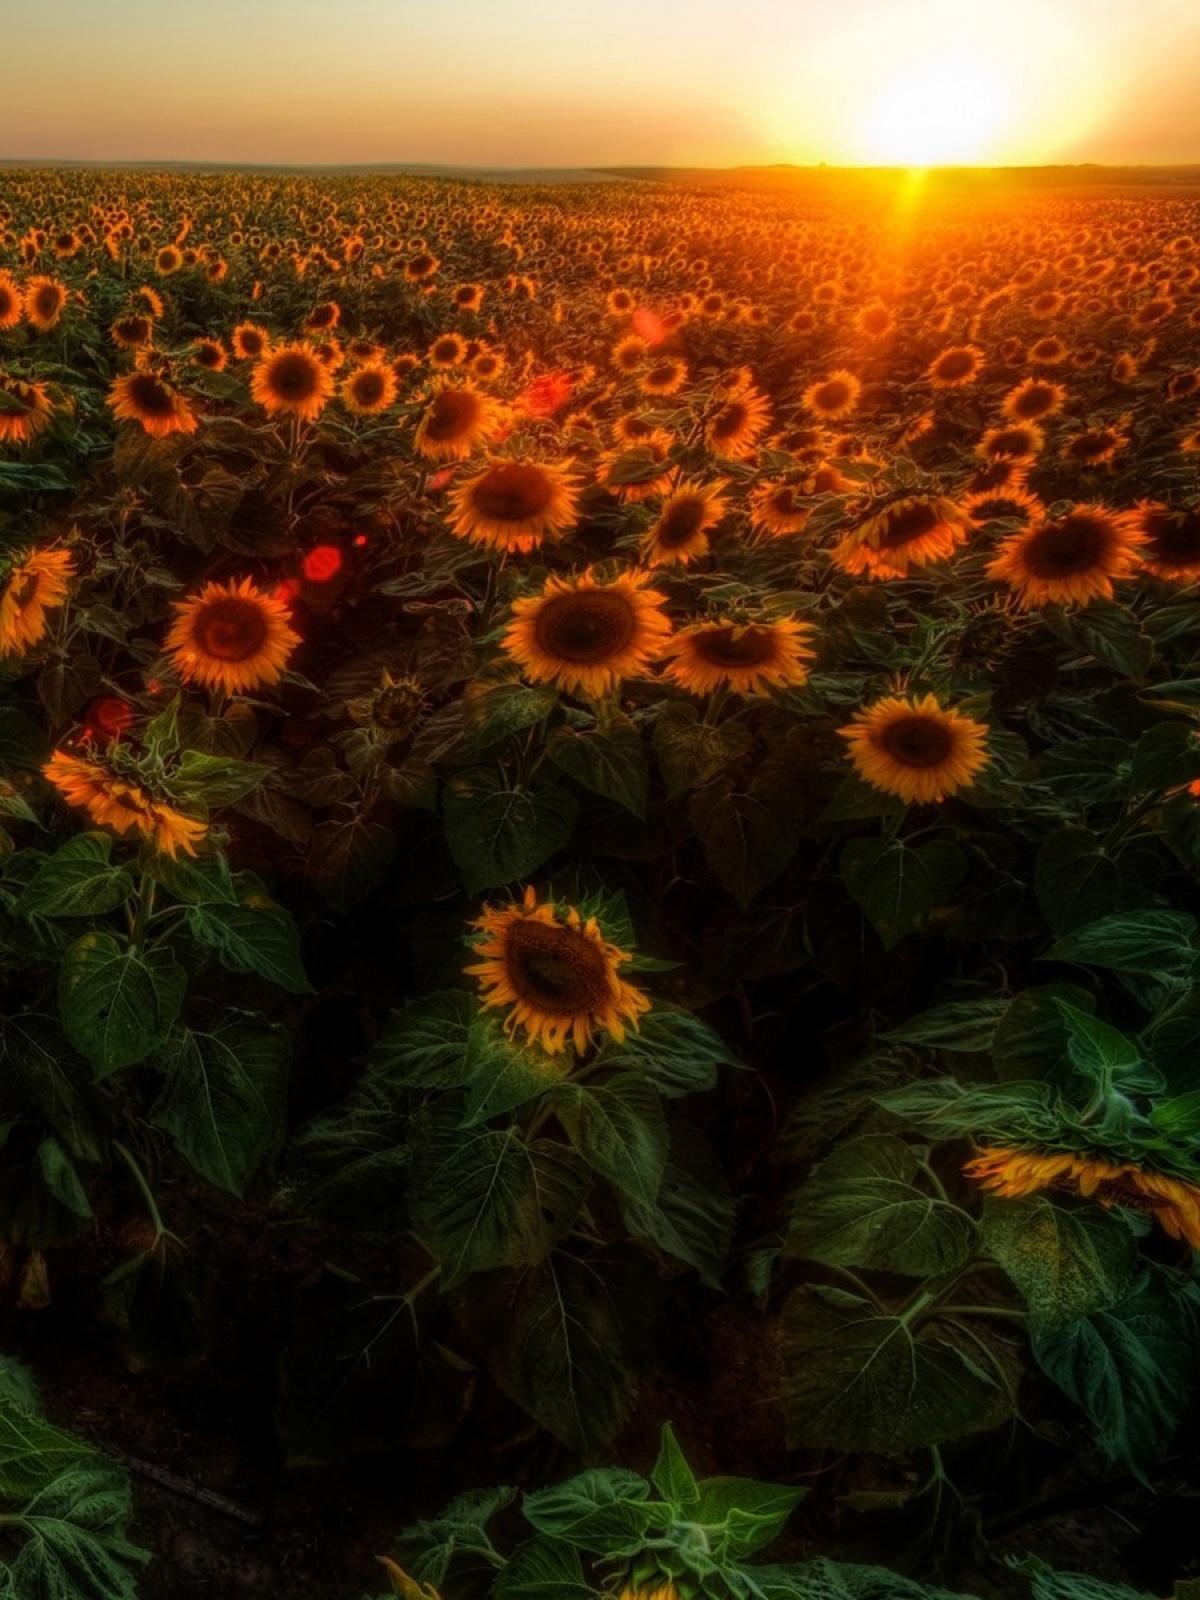 Sunset Sunflowers Field Android Wallpaper Of Sunflowers